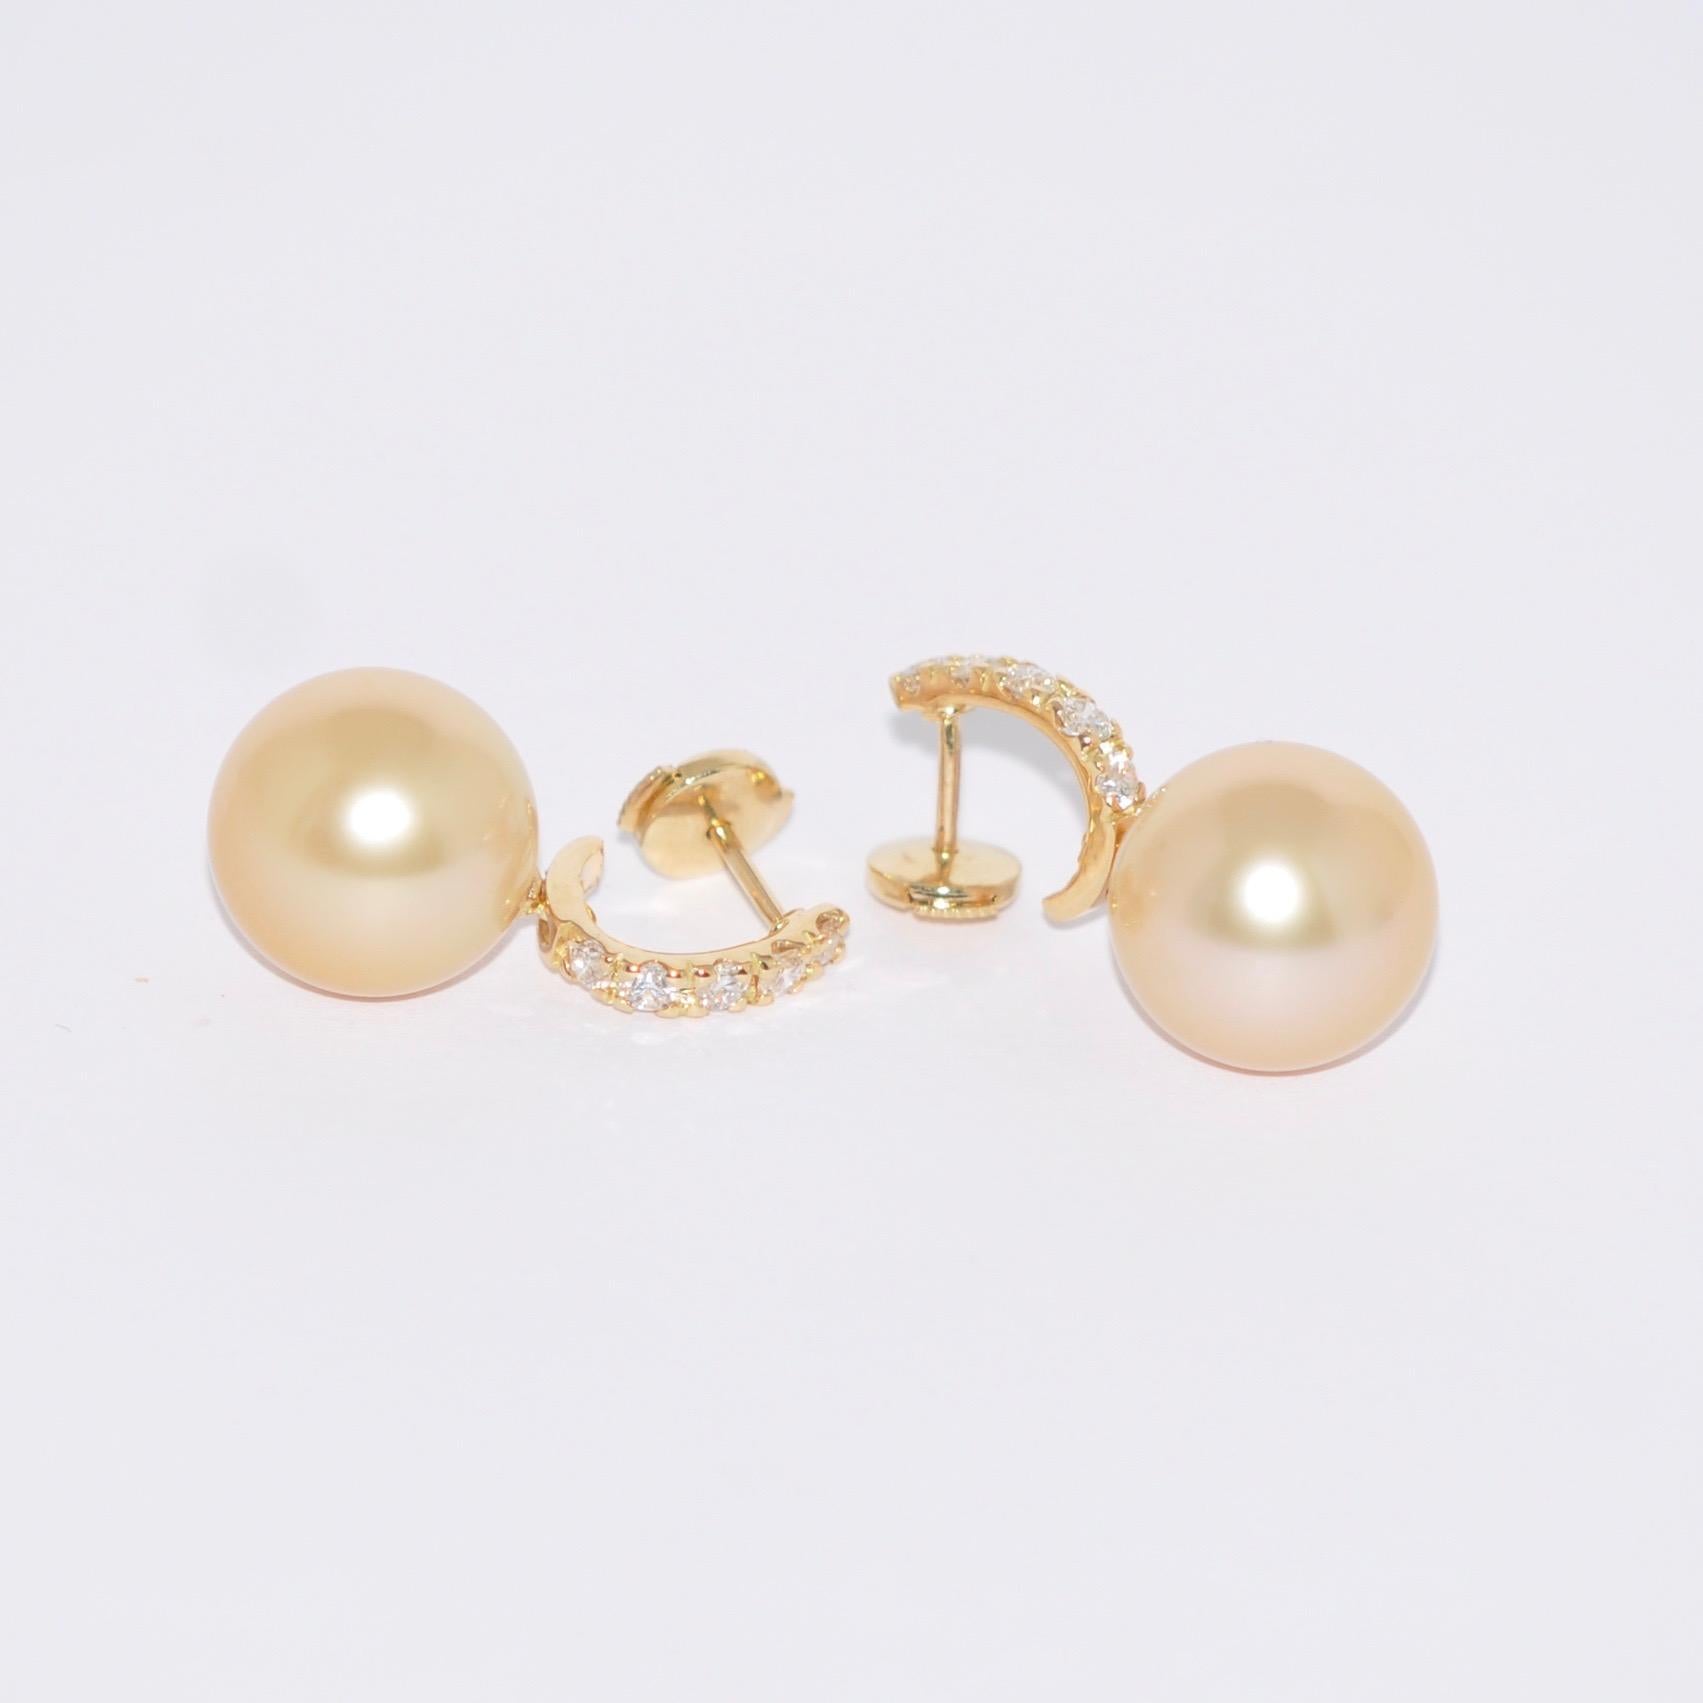 Discover this South Sea Pearl and White Diamonds on Yellow Gold 18 Karat Drop Earrings.
South Sea Pearls 12/12.5 mm
10 White Diamonds Brilliant 0.37 Karat Color G
Yellow Gold 18 Karat